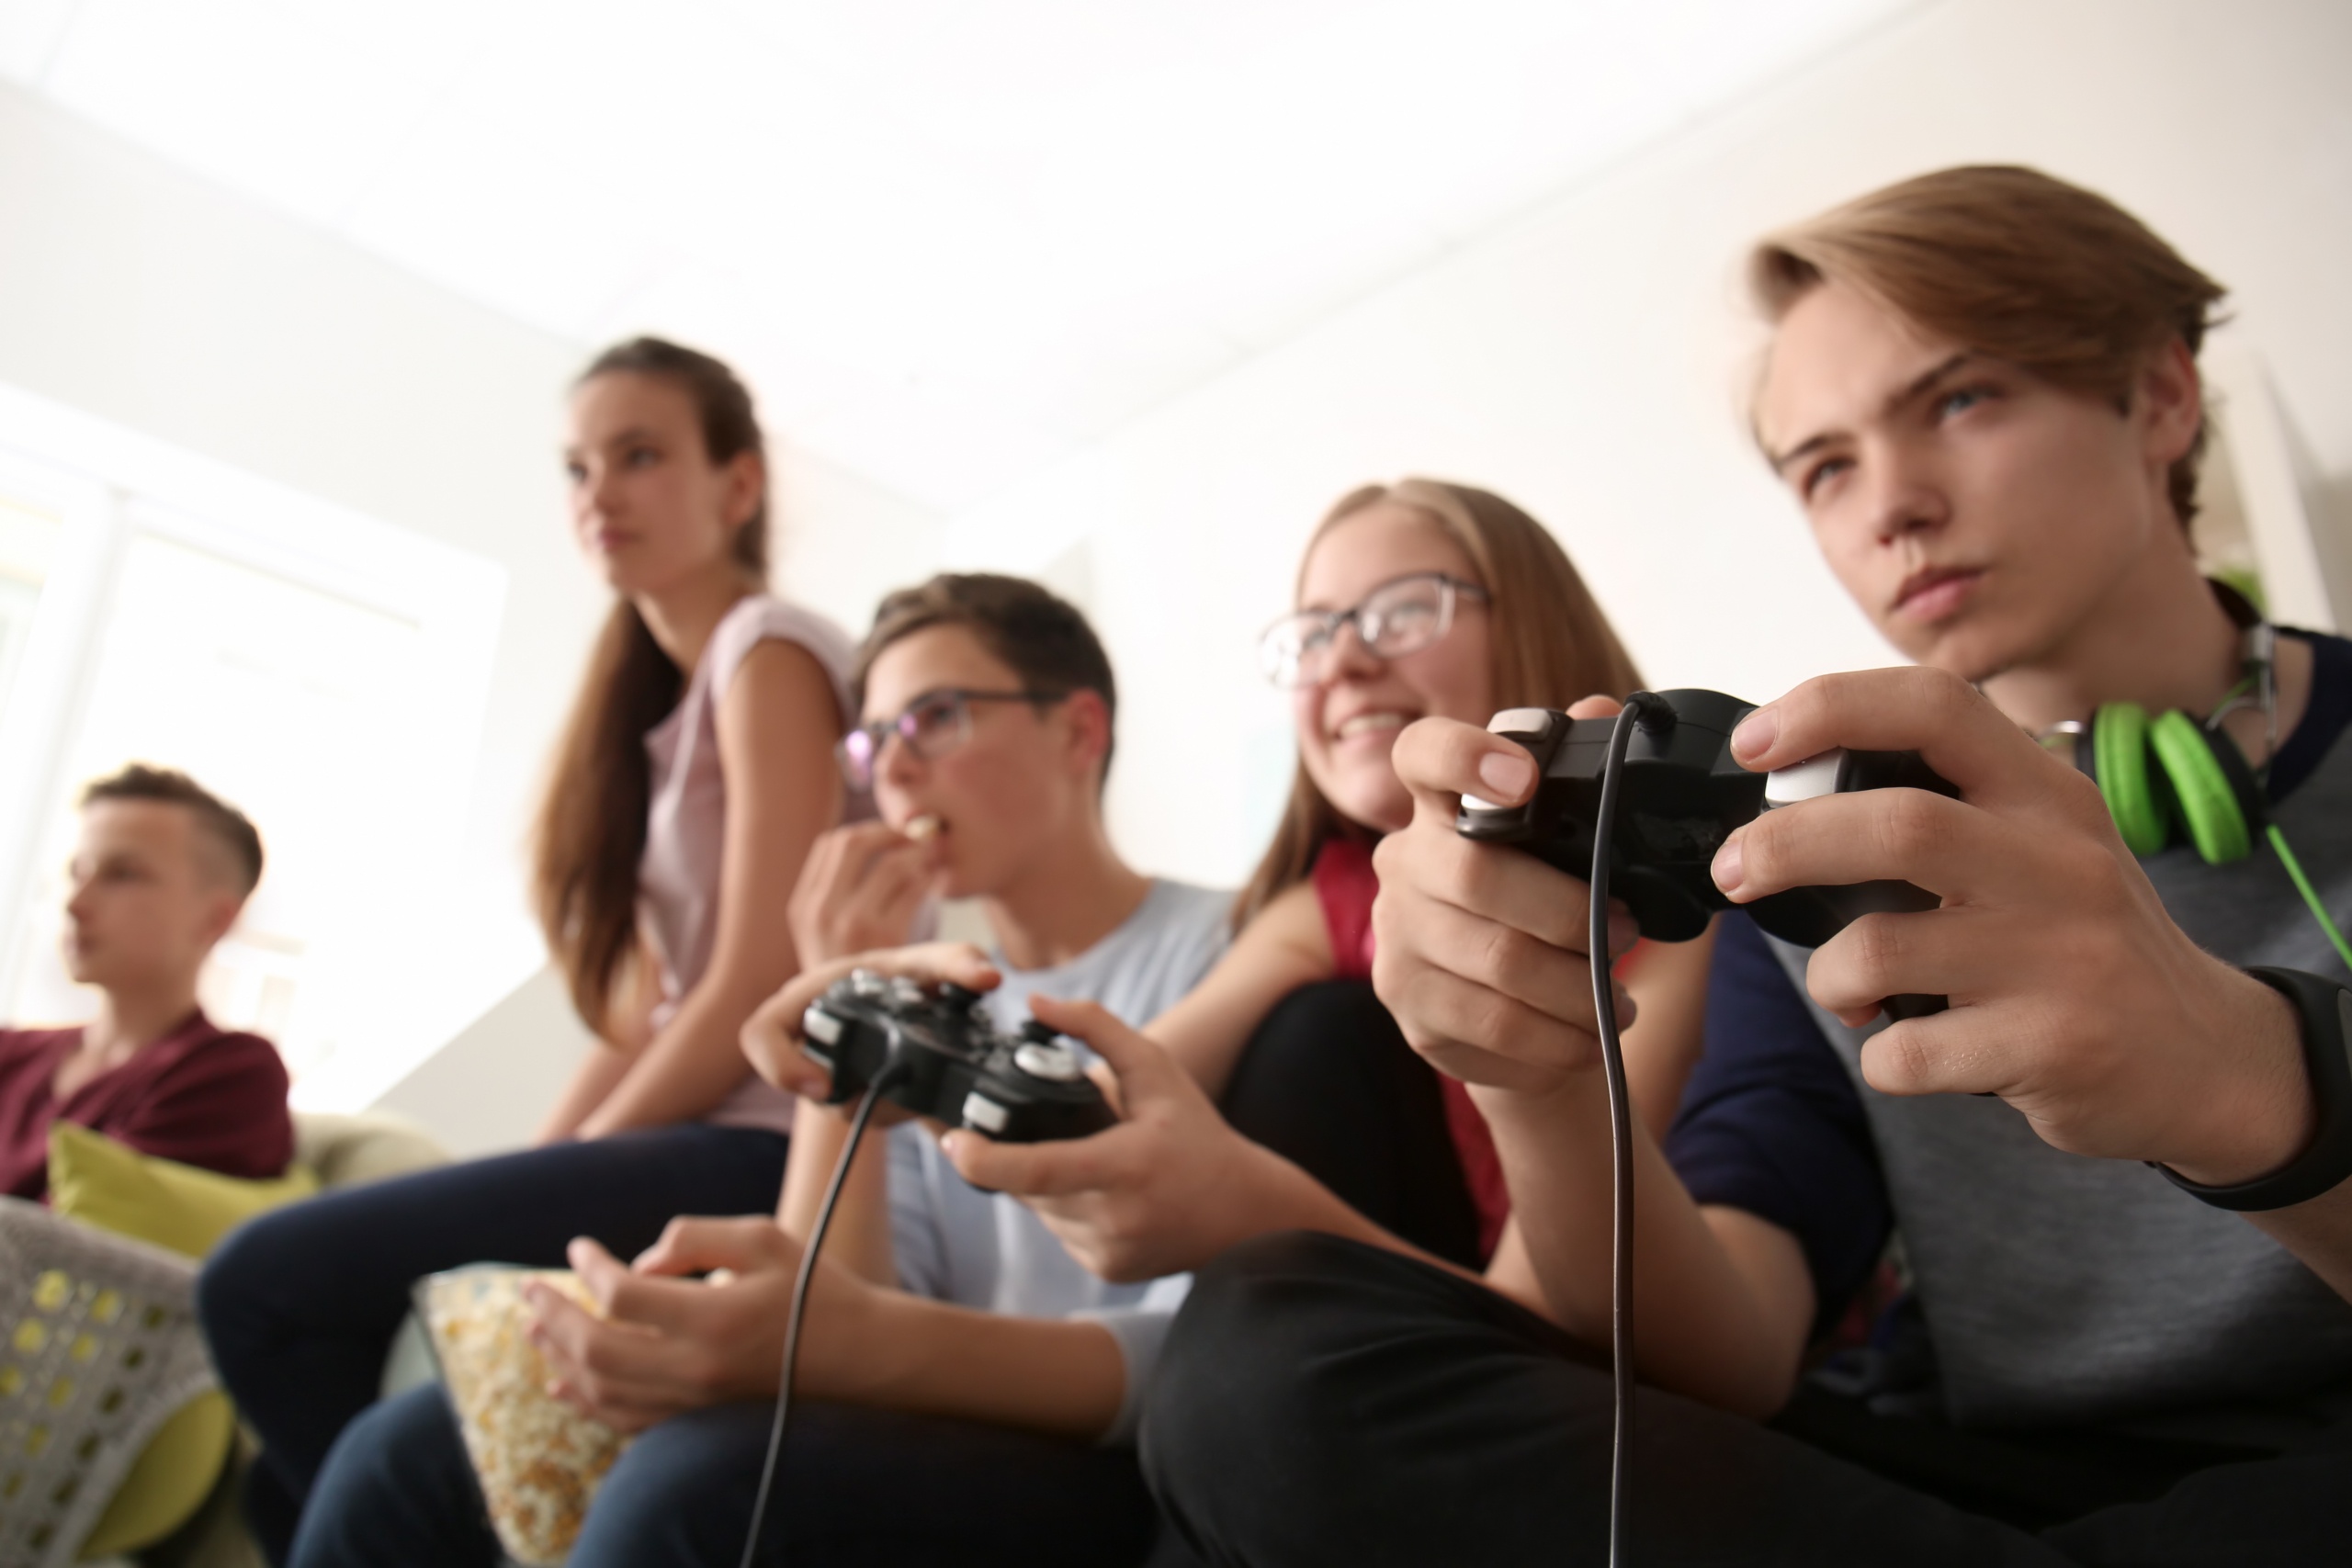 Teenagers playing video games at home